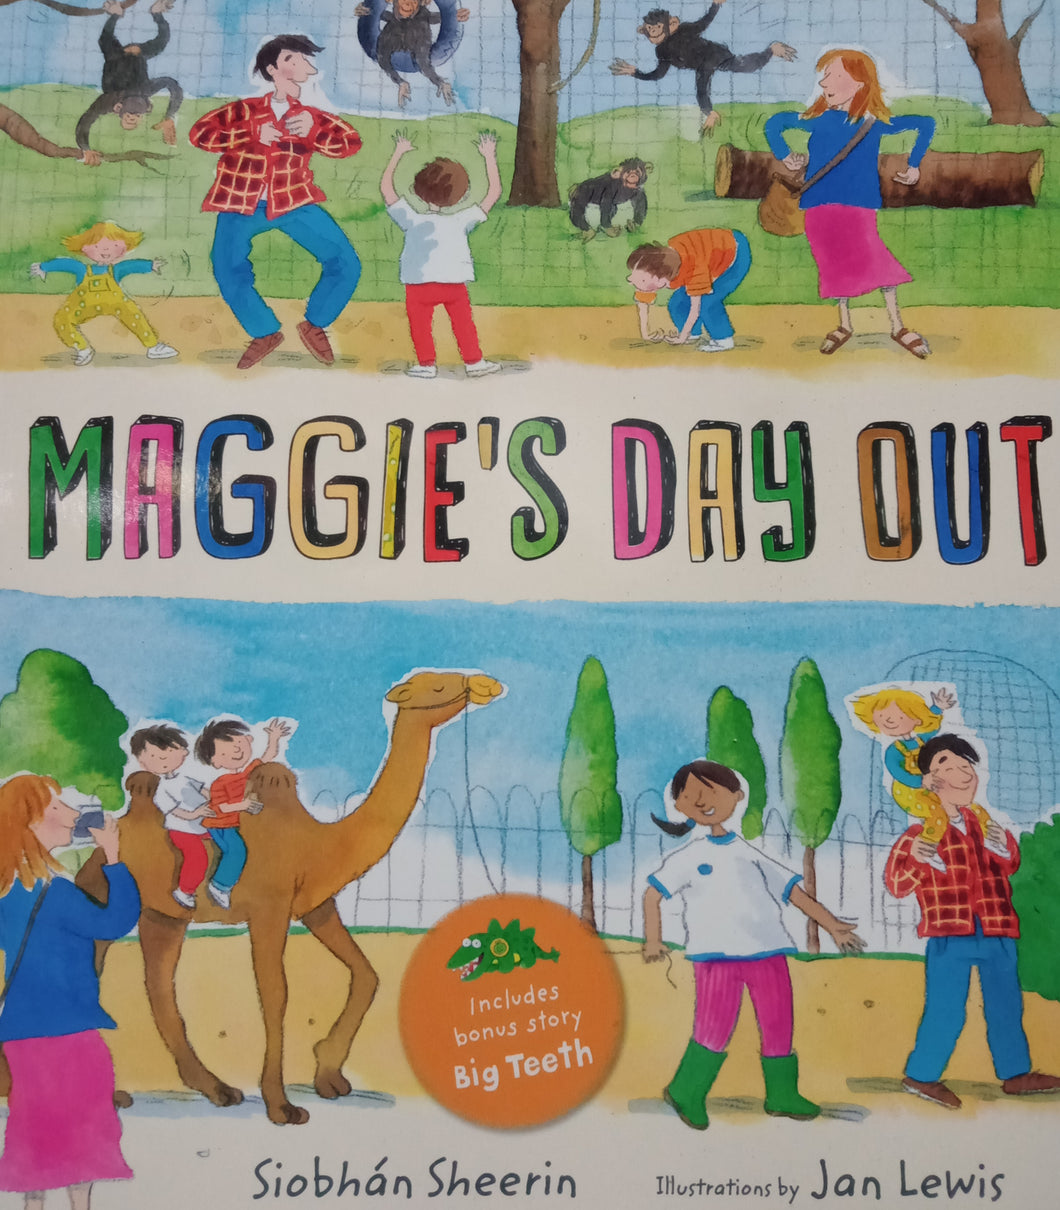 Maggie's Day Out by Jan Lewis